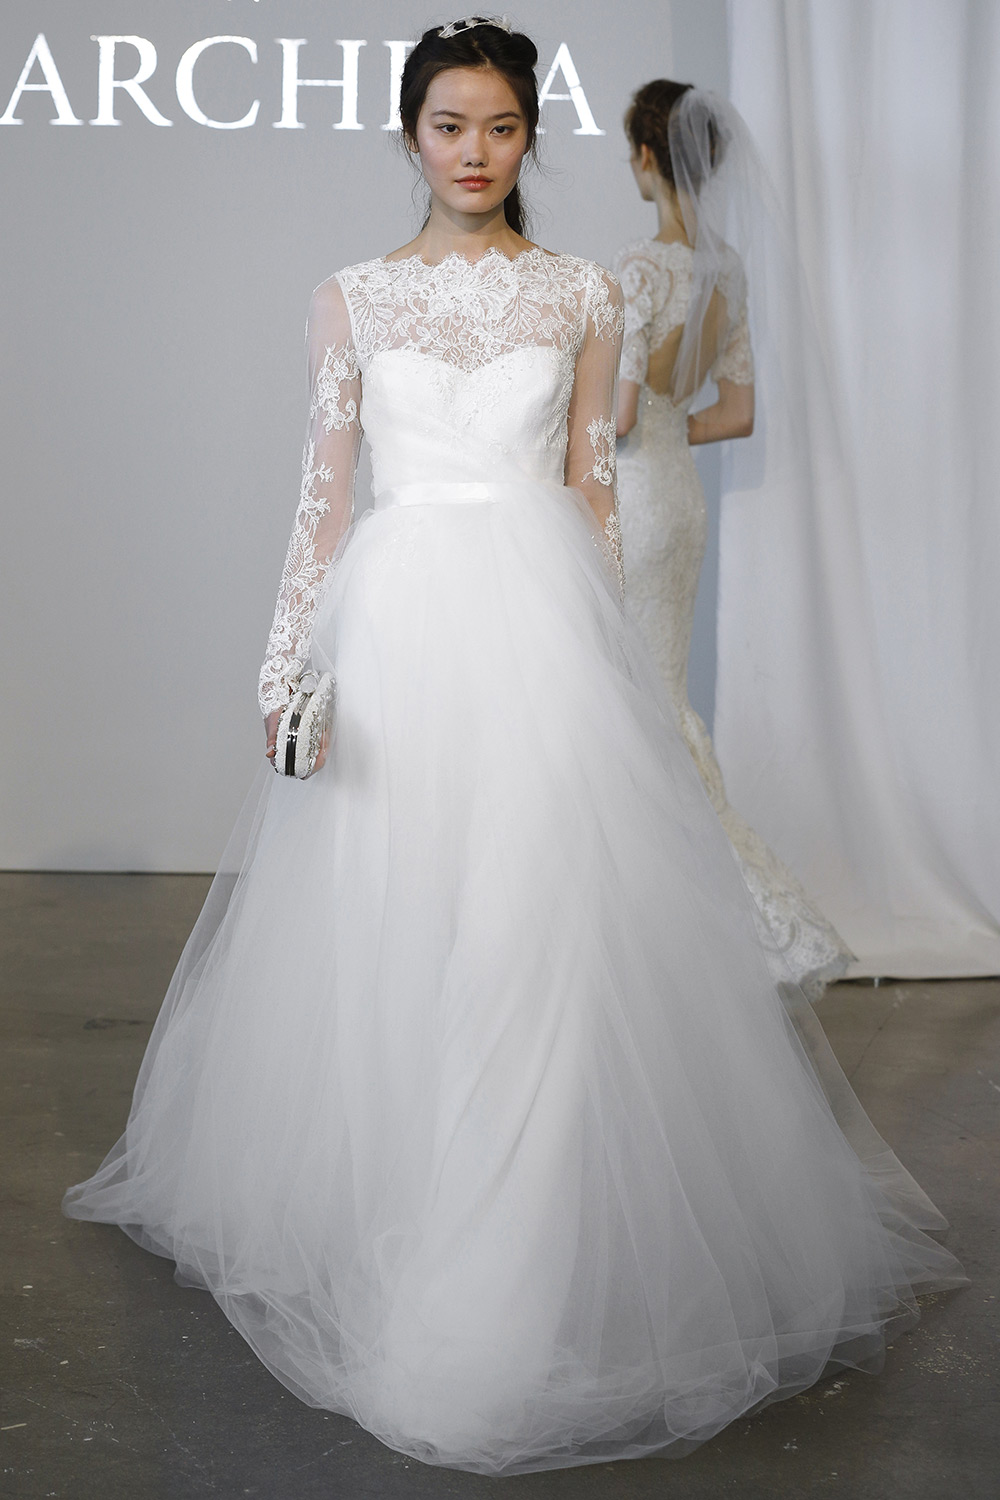 Wedding Dress with a Dramatic Neckline from Marchesa Spring 2015 Bridal Collection